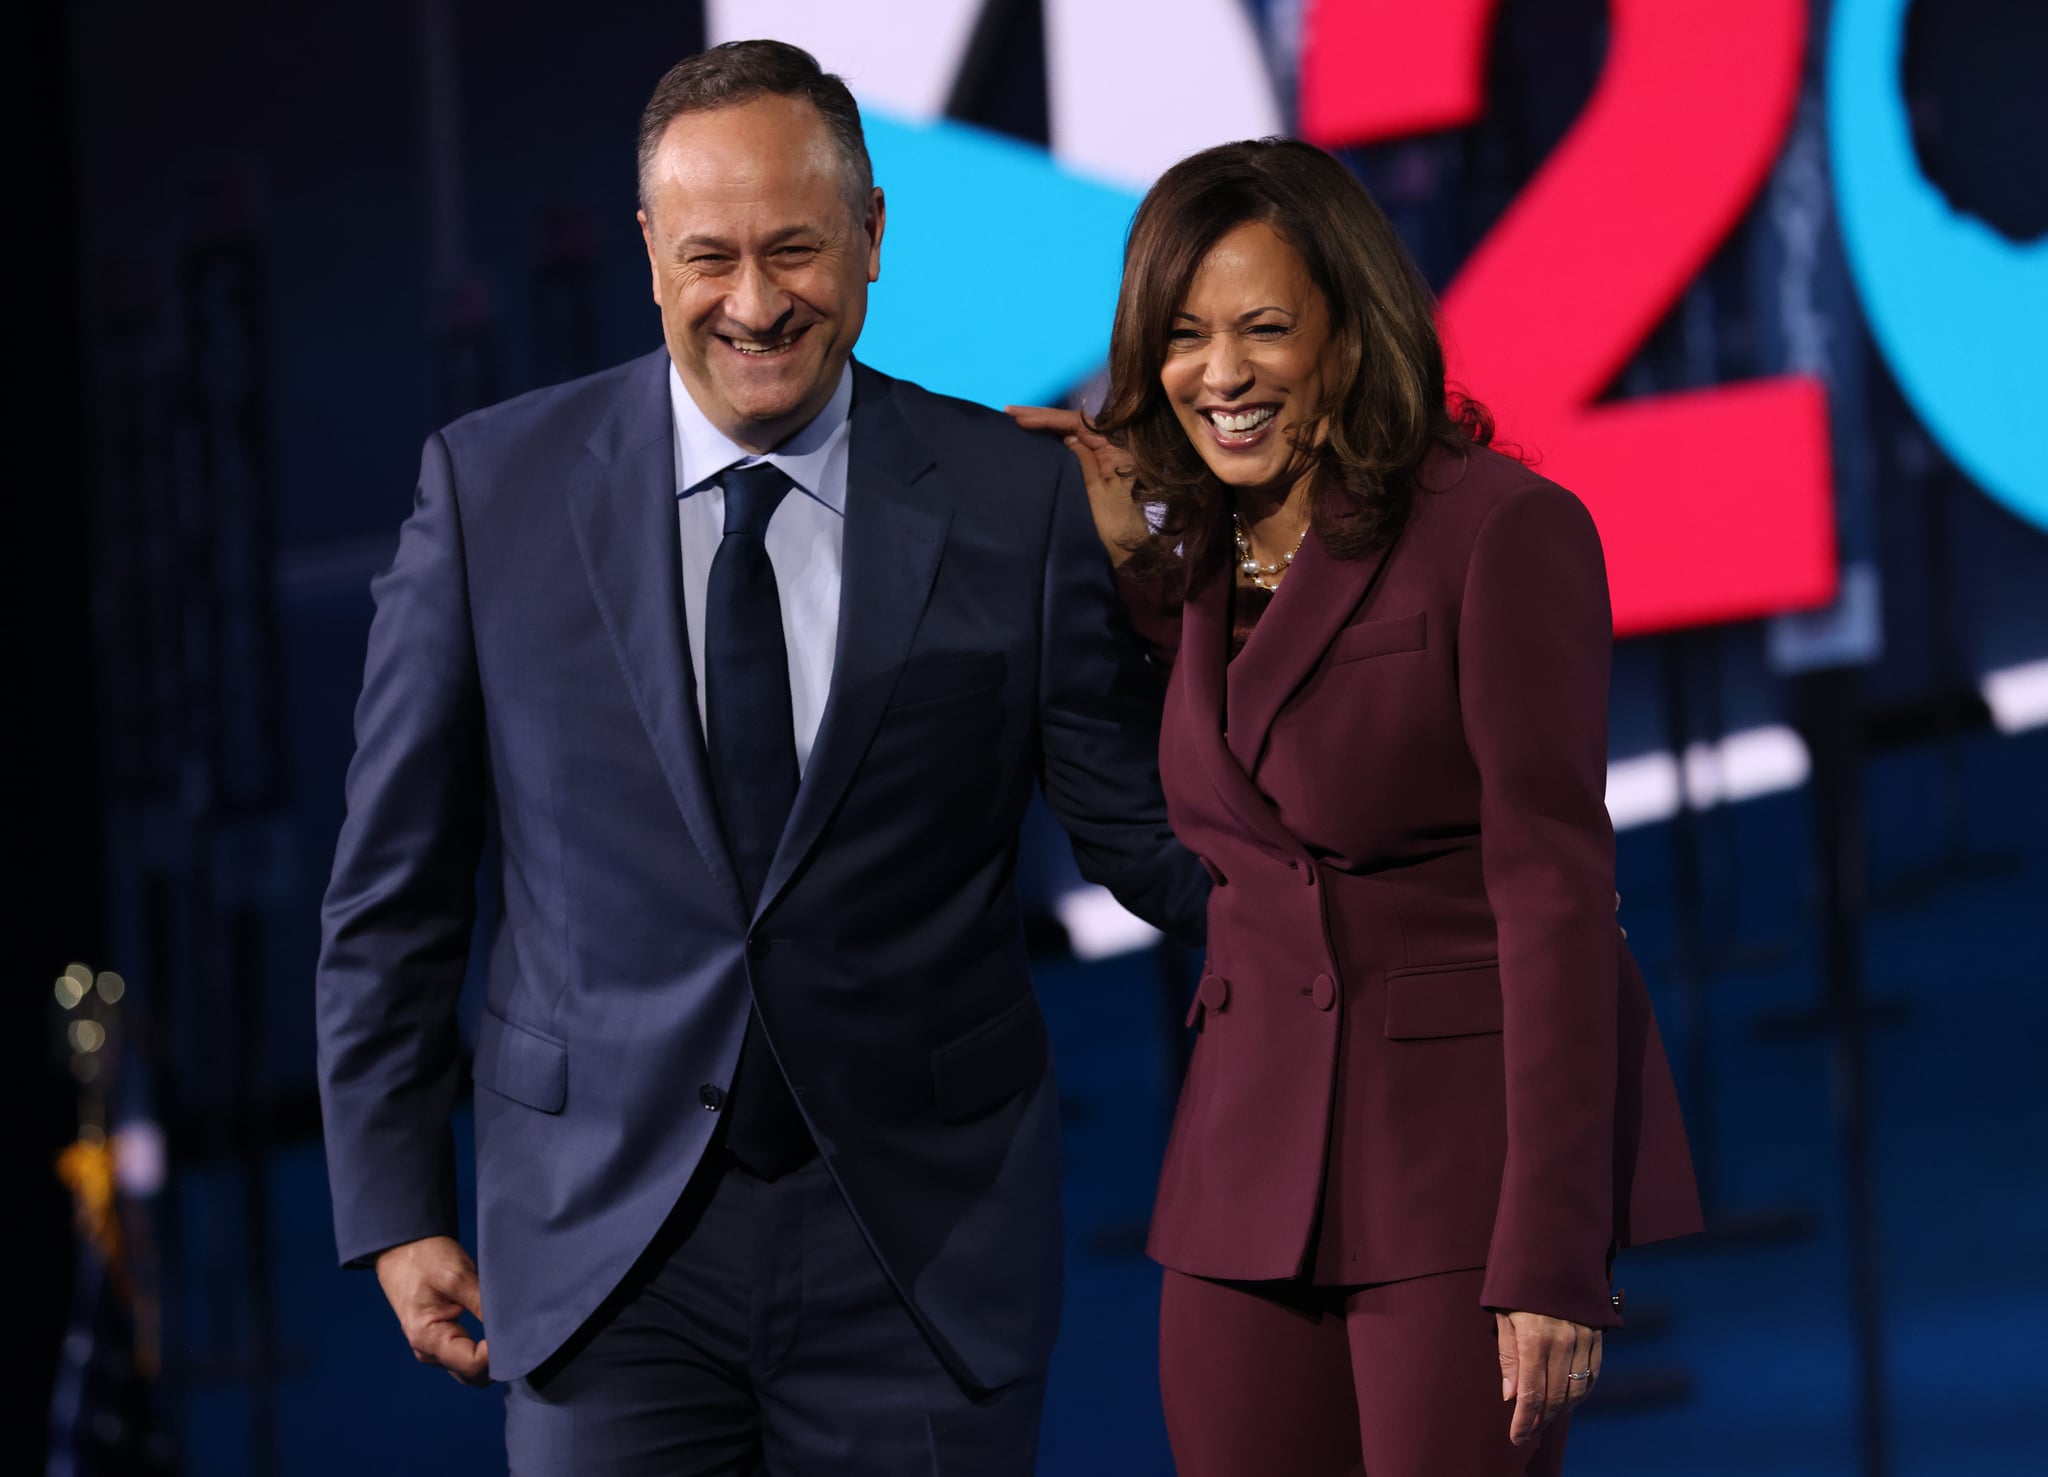 WILMINGTON, DELAWARE - AUGUST 19:  Democratic vice presidential nominee U.S. Sen. Kamala Harris (D-CA) and her husband Douglas Emhoff appear on stage after Harris delivered her acceptance speech on the third night of the Democratic National Convention from the Chase Centre August 19, 2020 in Wilmington, Delaware. The convention, which was once expected to draw 50,000 people to Milwaukee, Wisconsin, is now taking place virtually due to the coronavirus pandemic. Harris is the first African-American, first Asian-American, and third female vice presidential candidate on a major party ticket. (Photo by Win McNamee/Getty Images)